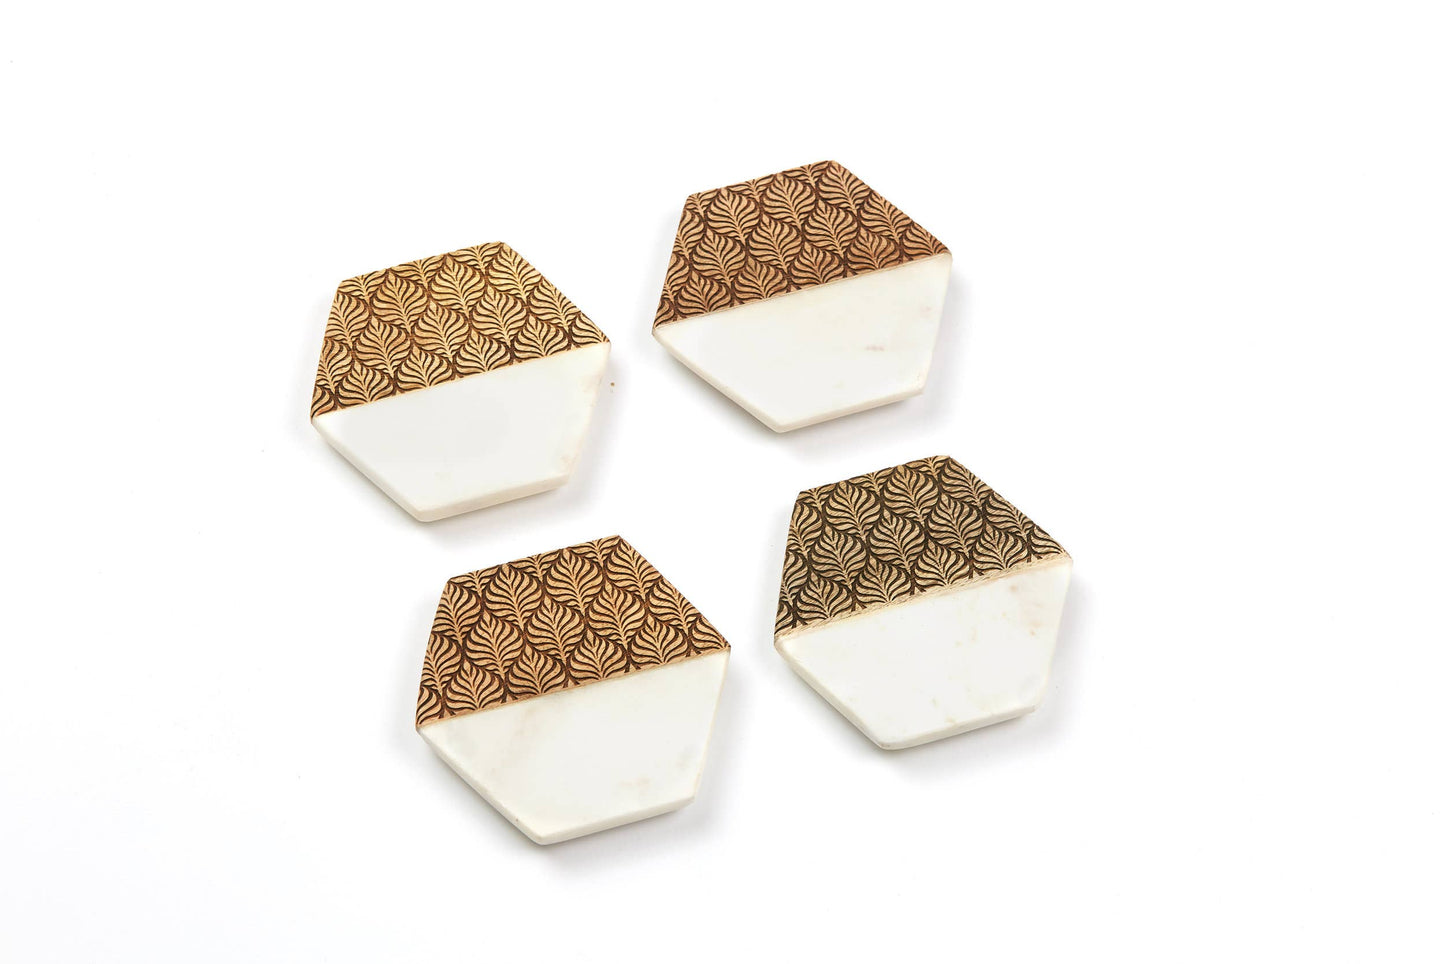 Hexagon Marble and Wood Coaster Set